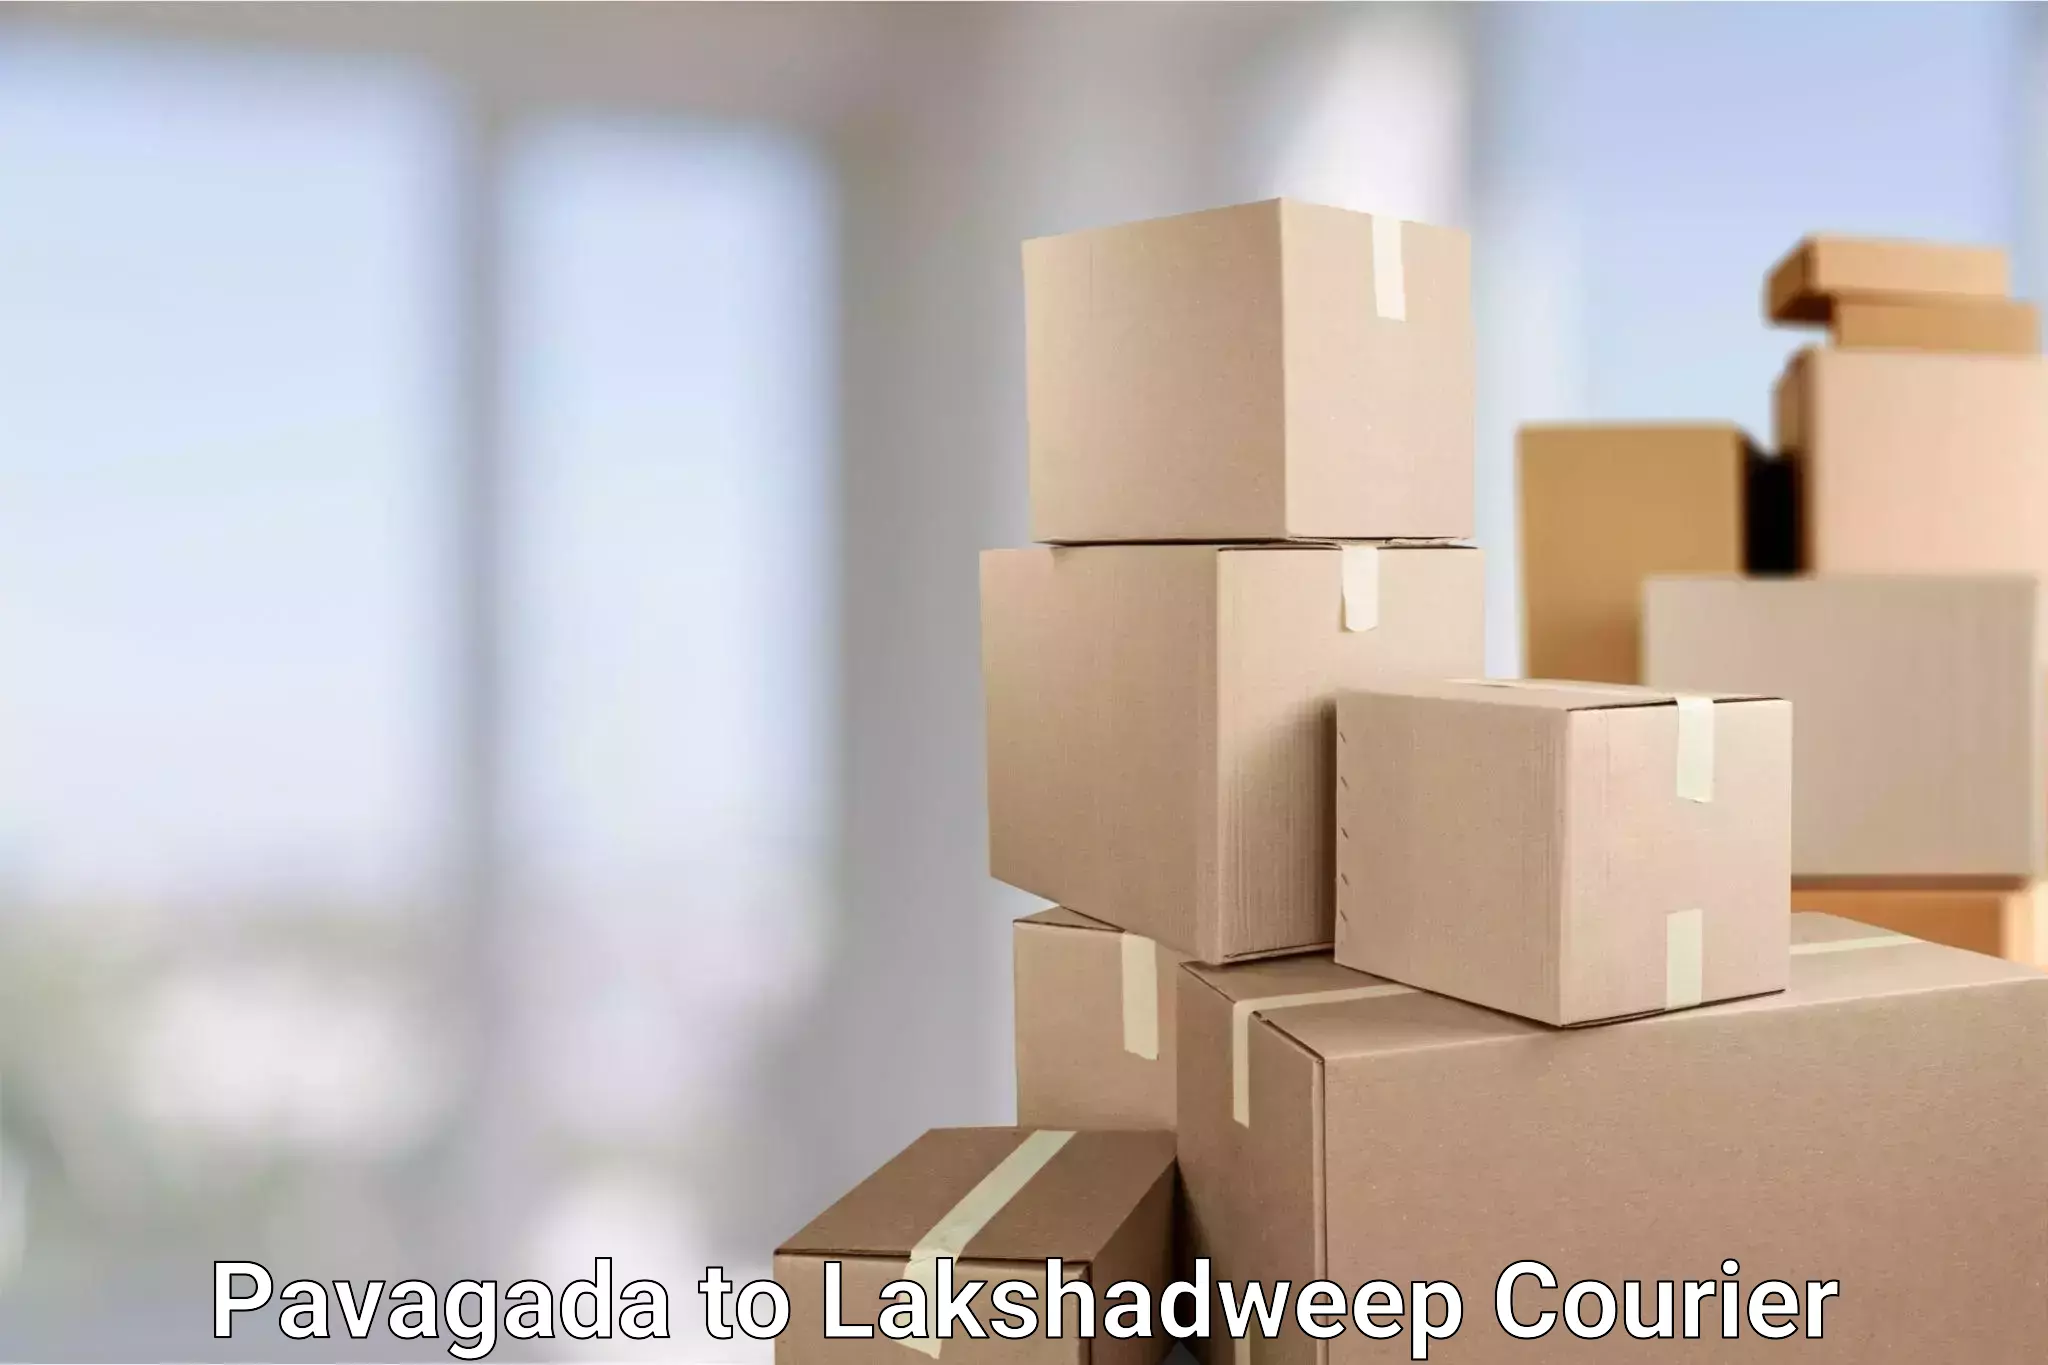 24-hour delivery options Pavagada to Lakshadweep